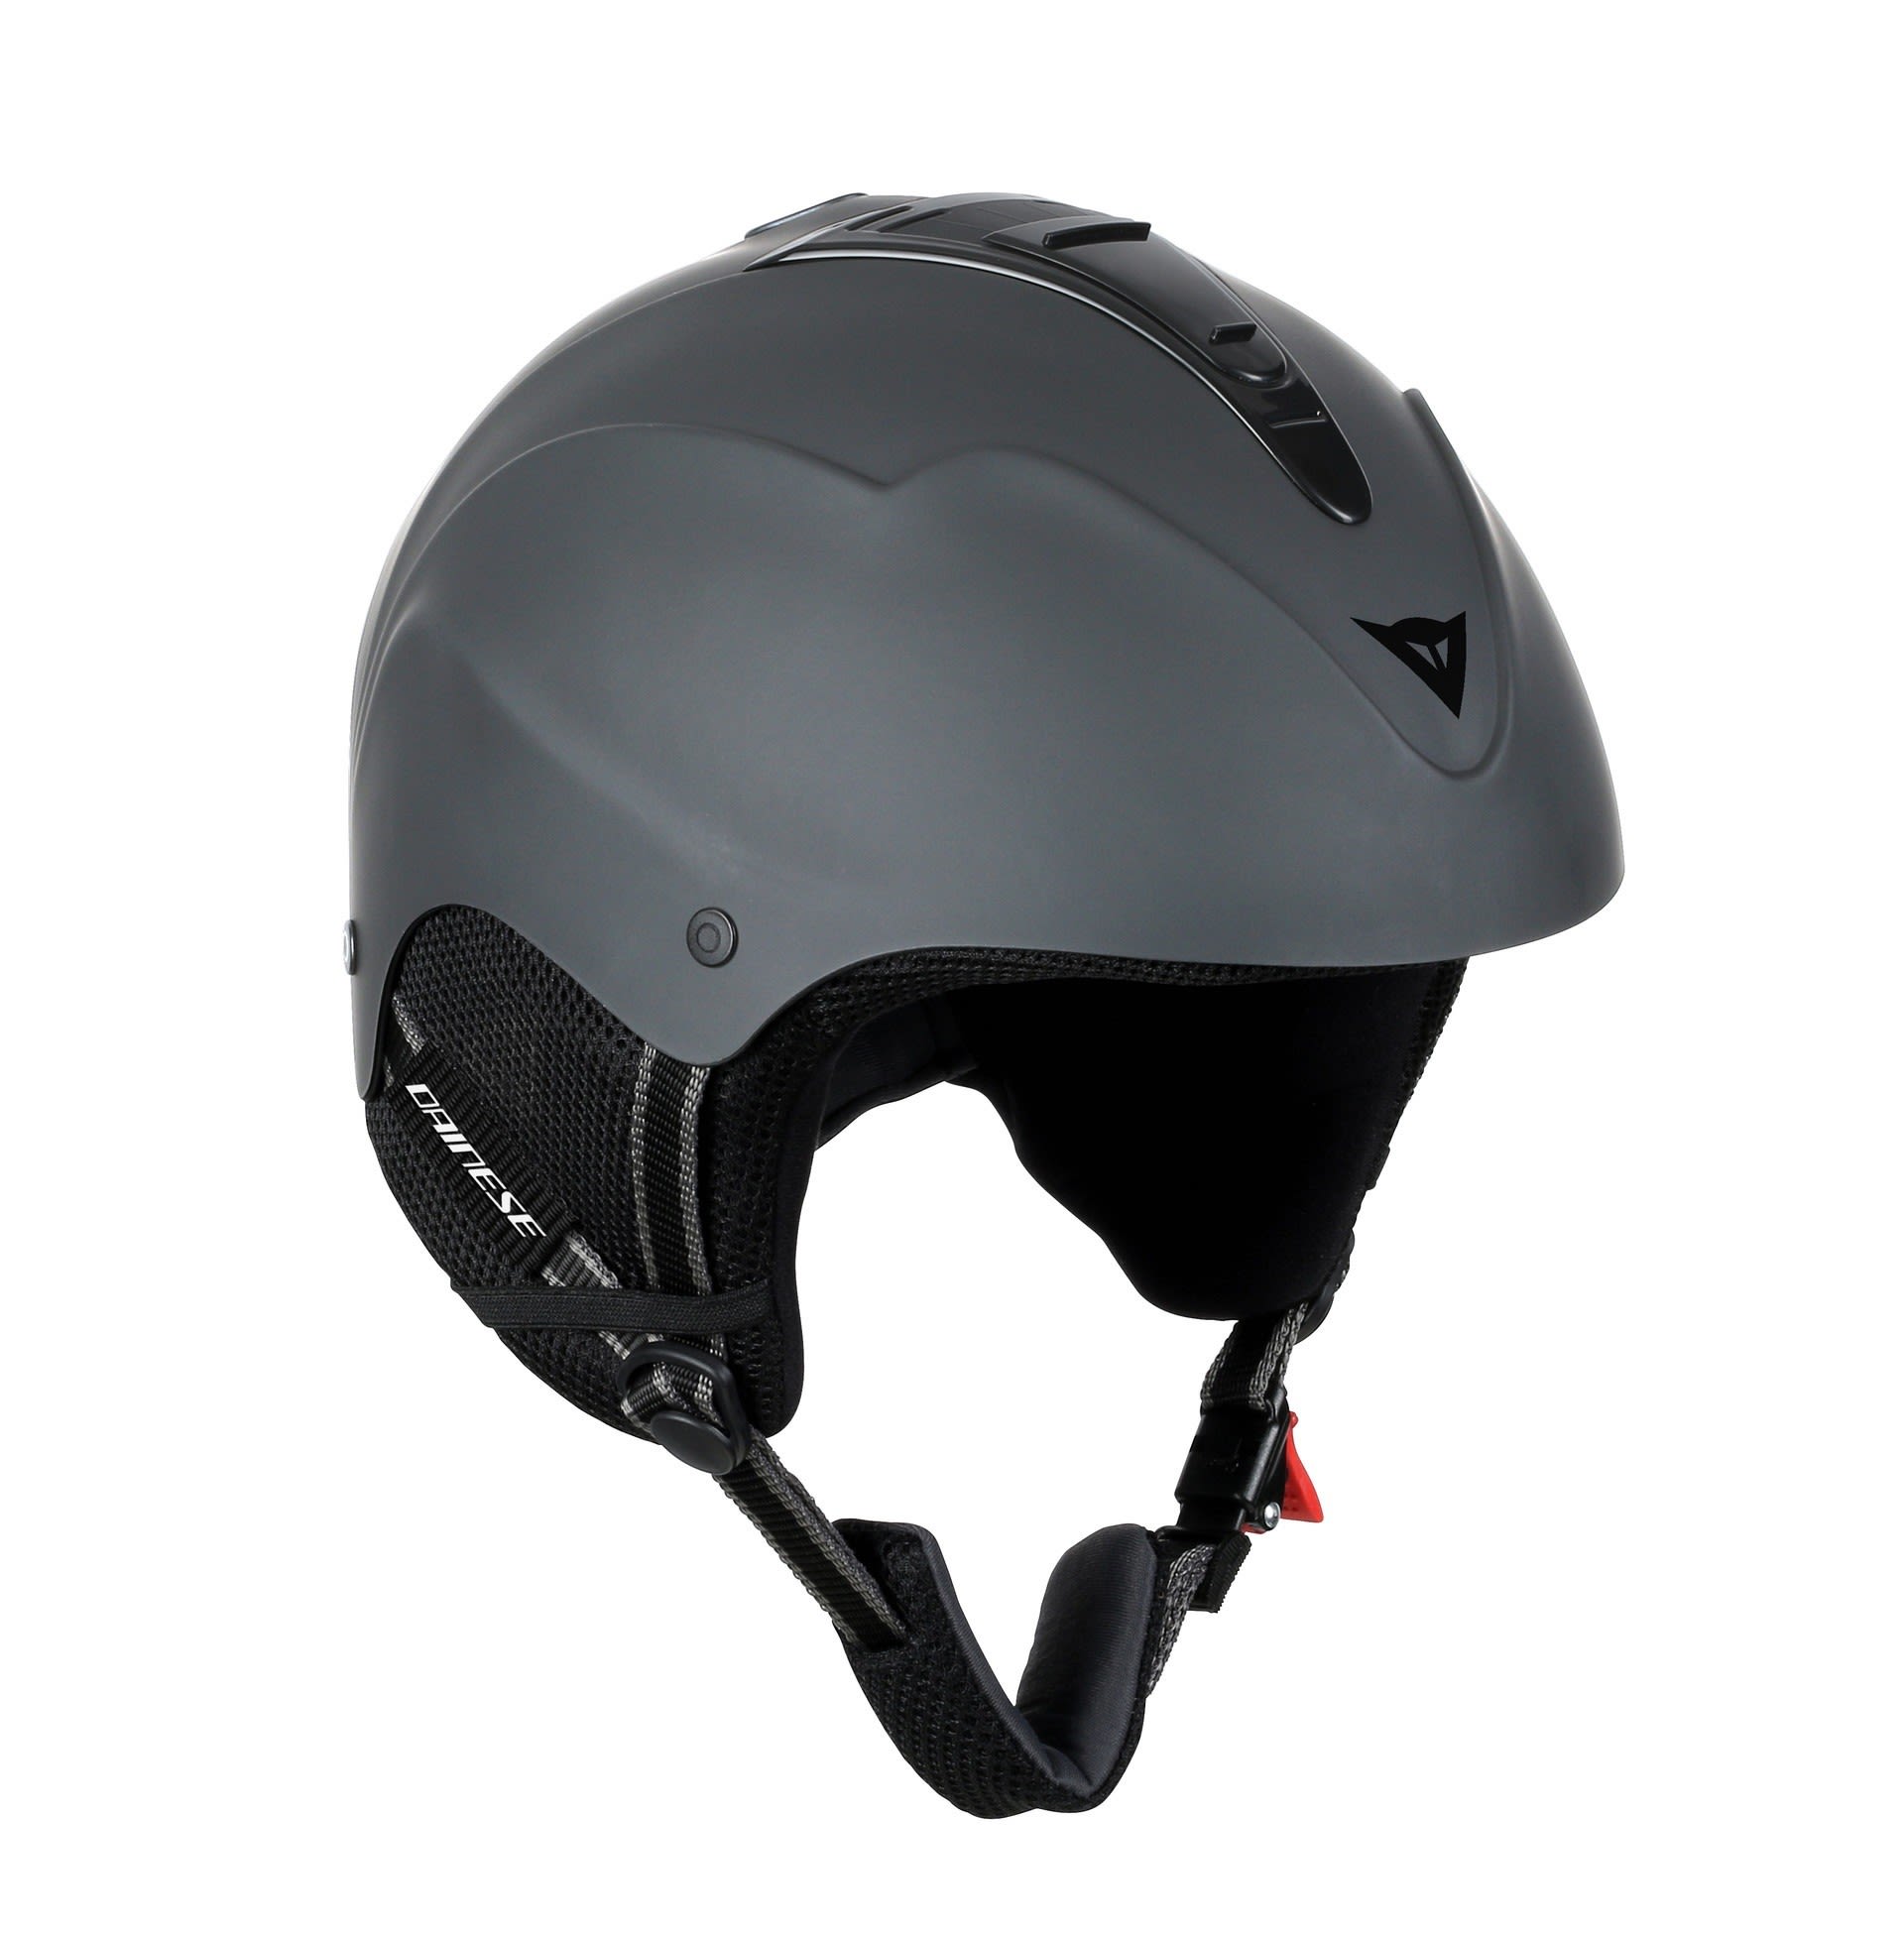 Dainese Atmungsaktiver robuster ABS Skisport Helm Anthracite